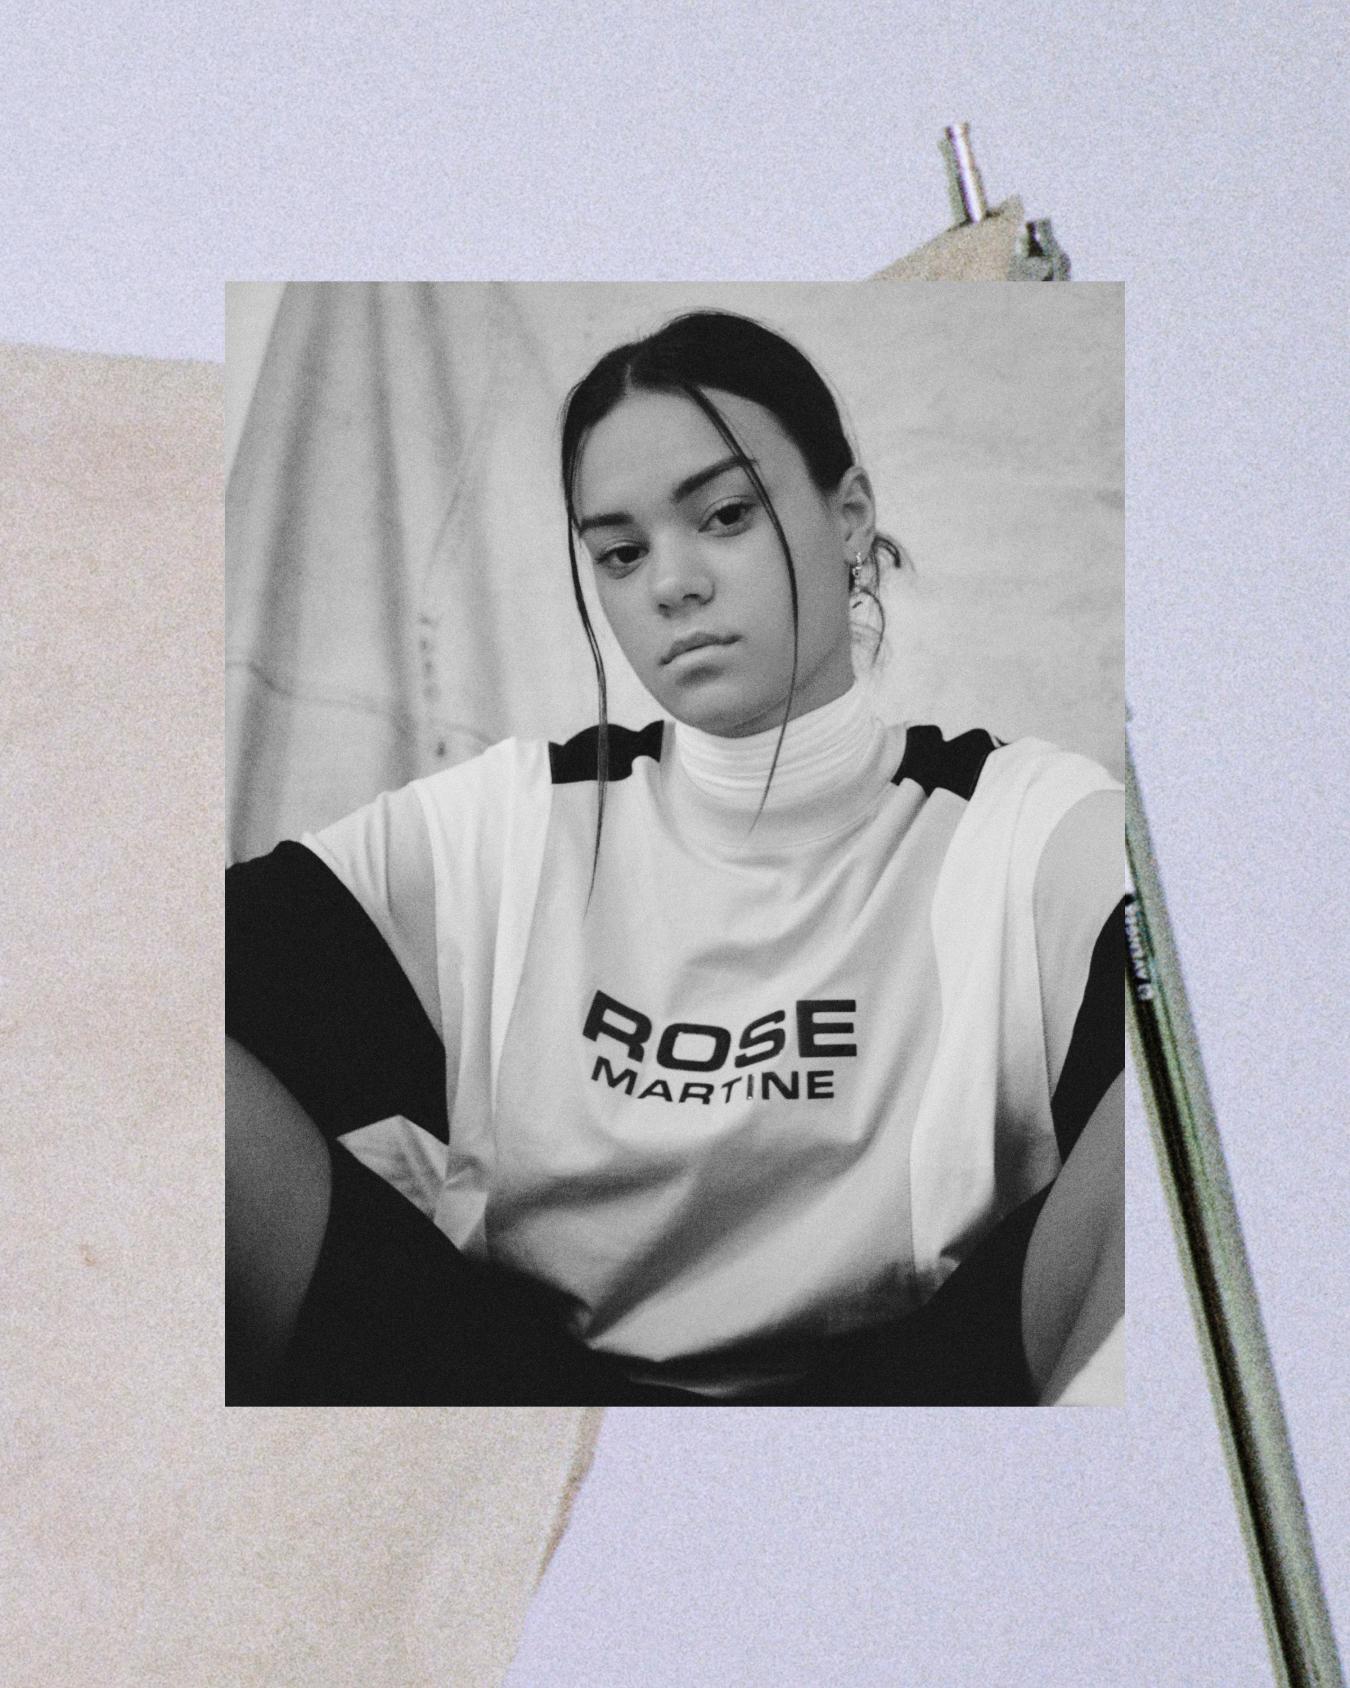 Martine Rose: Available now at NAKED Copenhagen